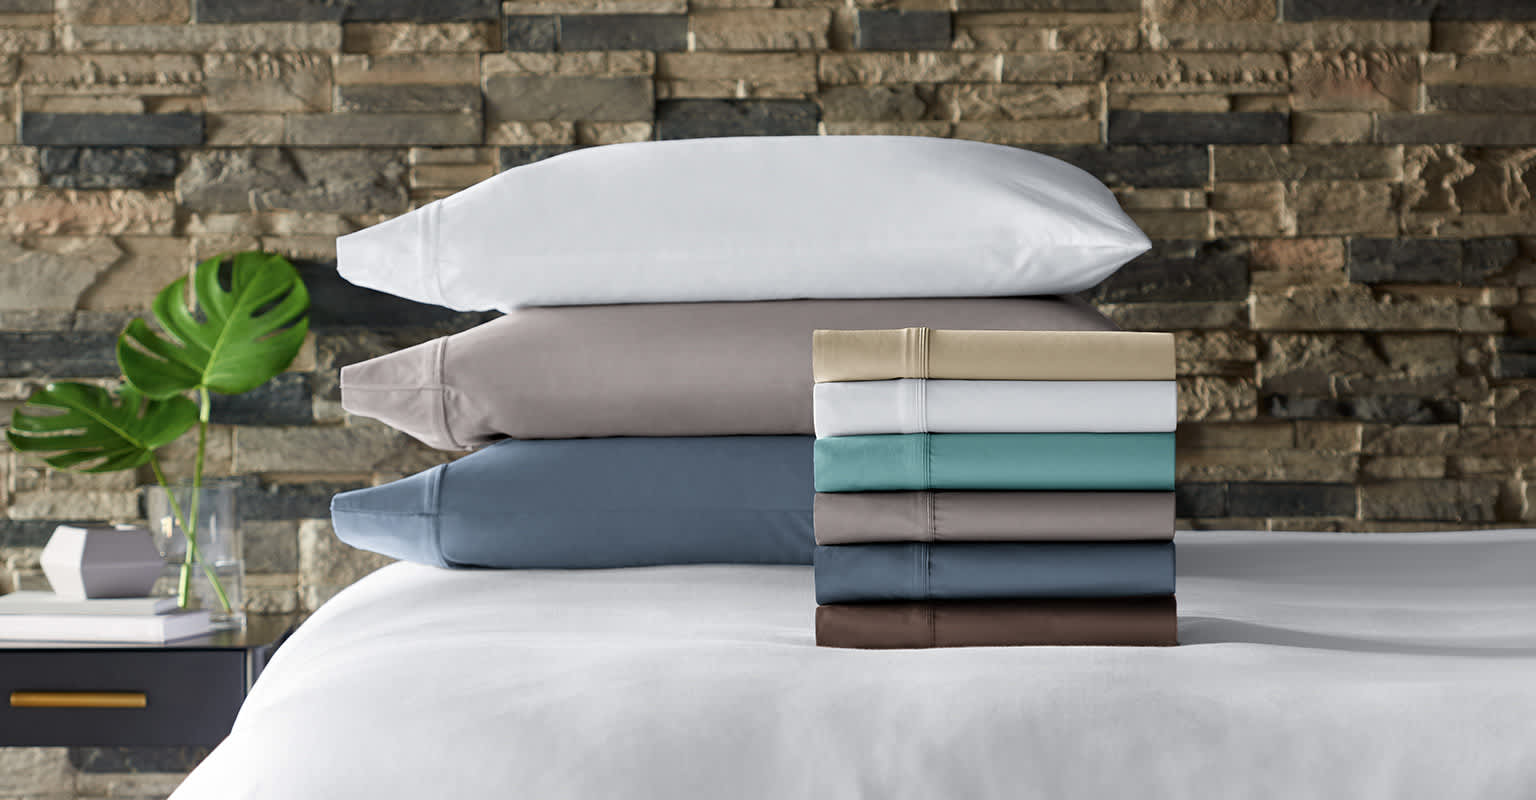 Stacks of crisp, soft-colored sheets and pillows next to sleek bedside table with modern accessories.